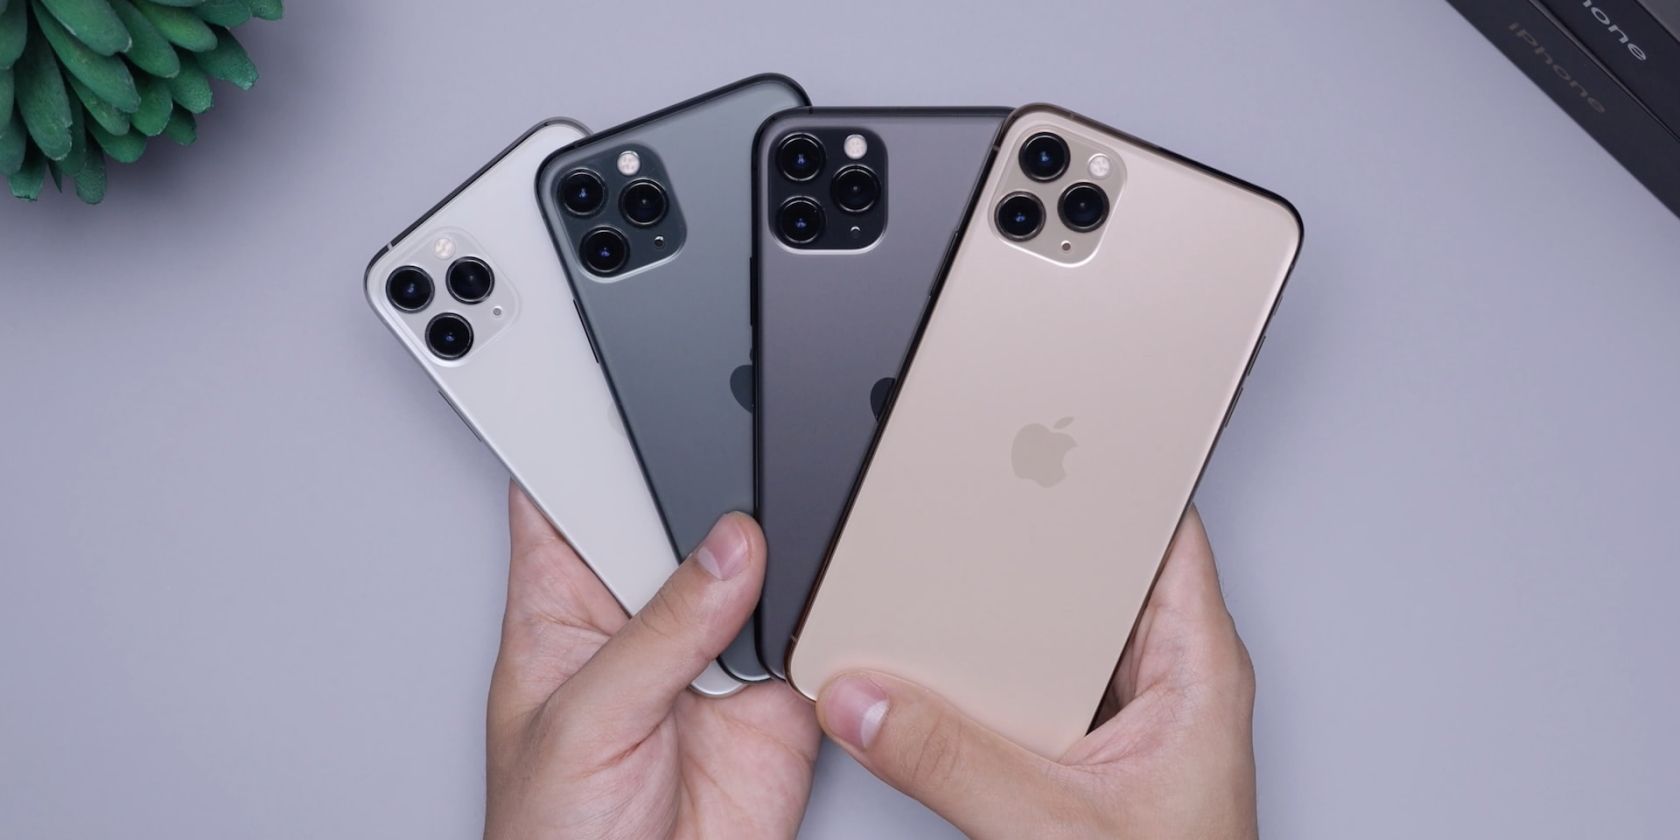 iPhone 12 Pro models in hand